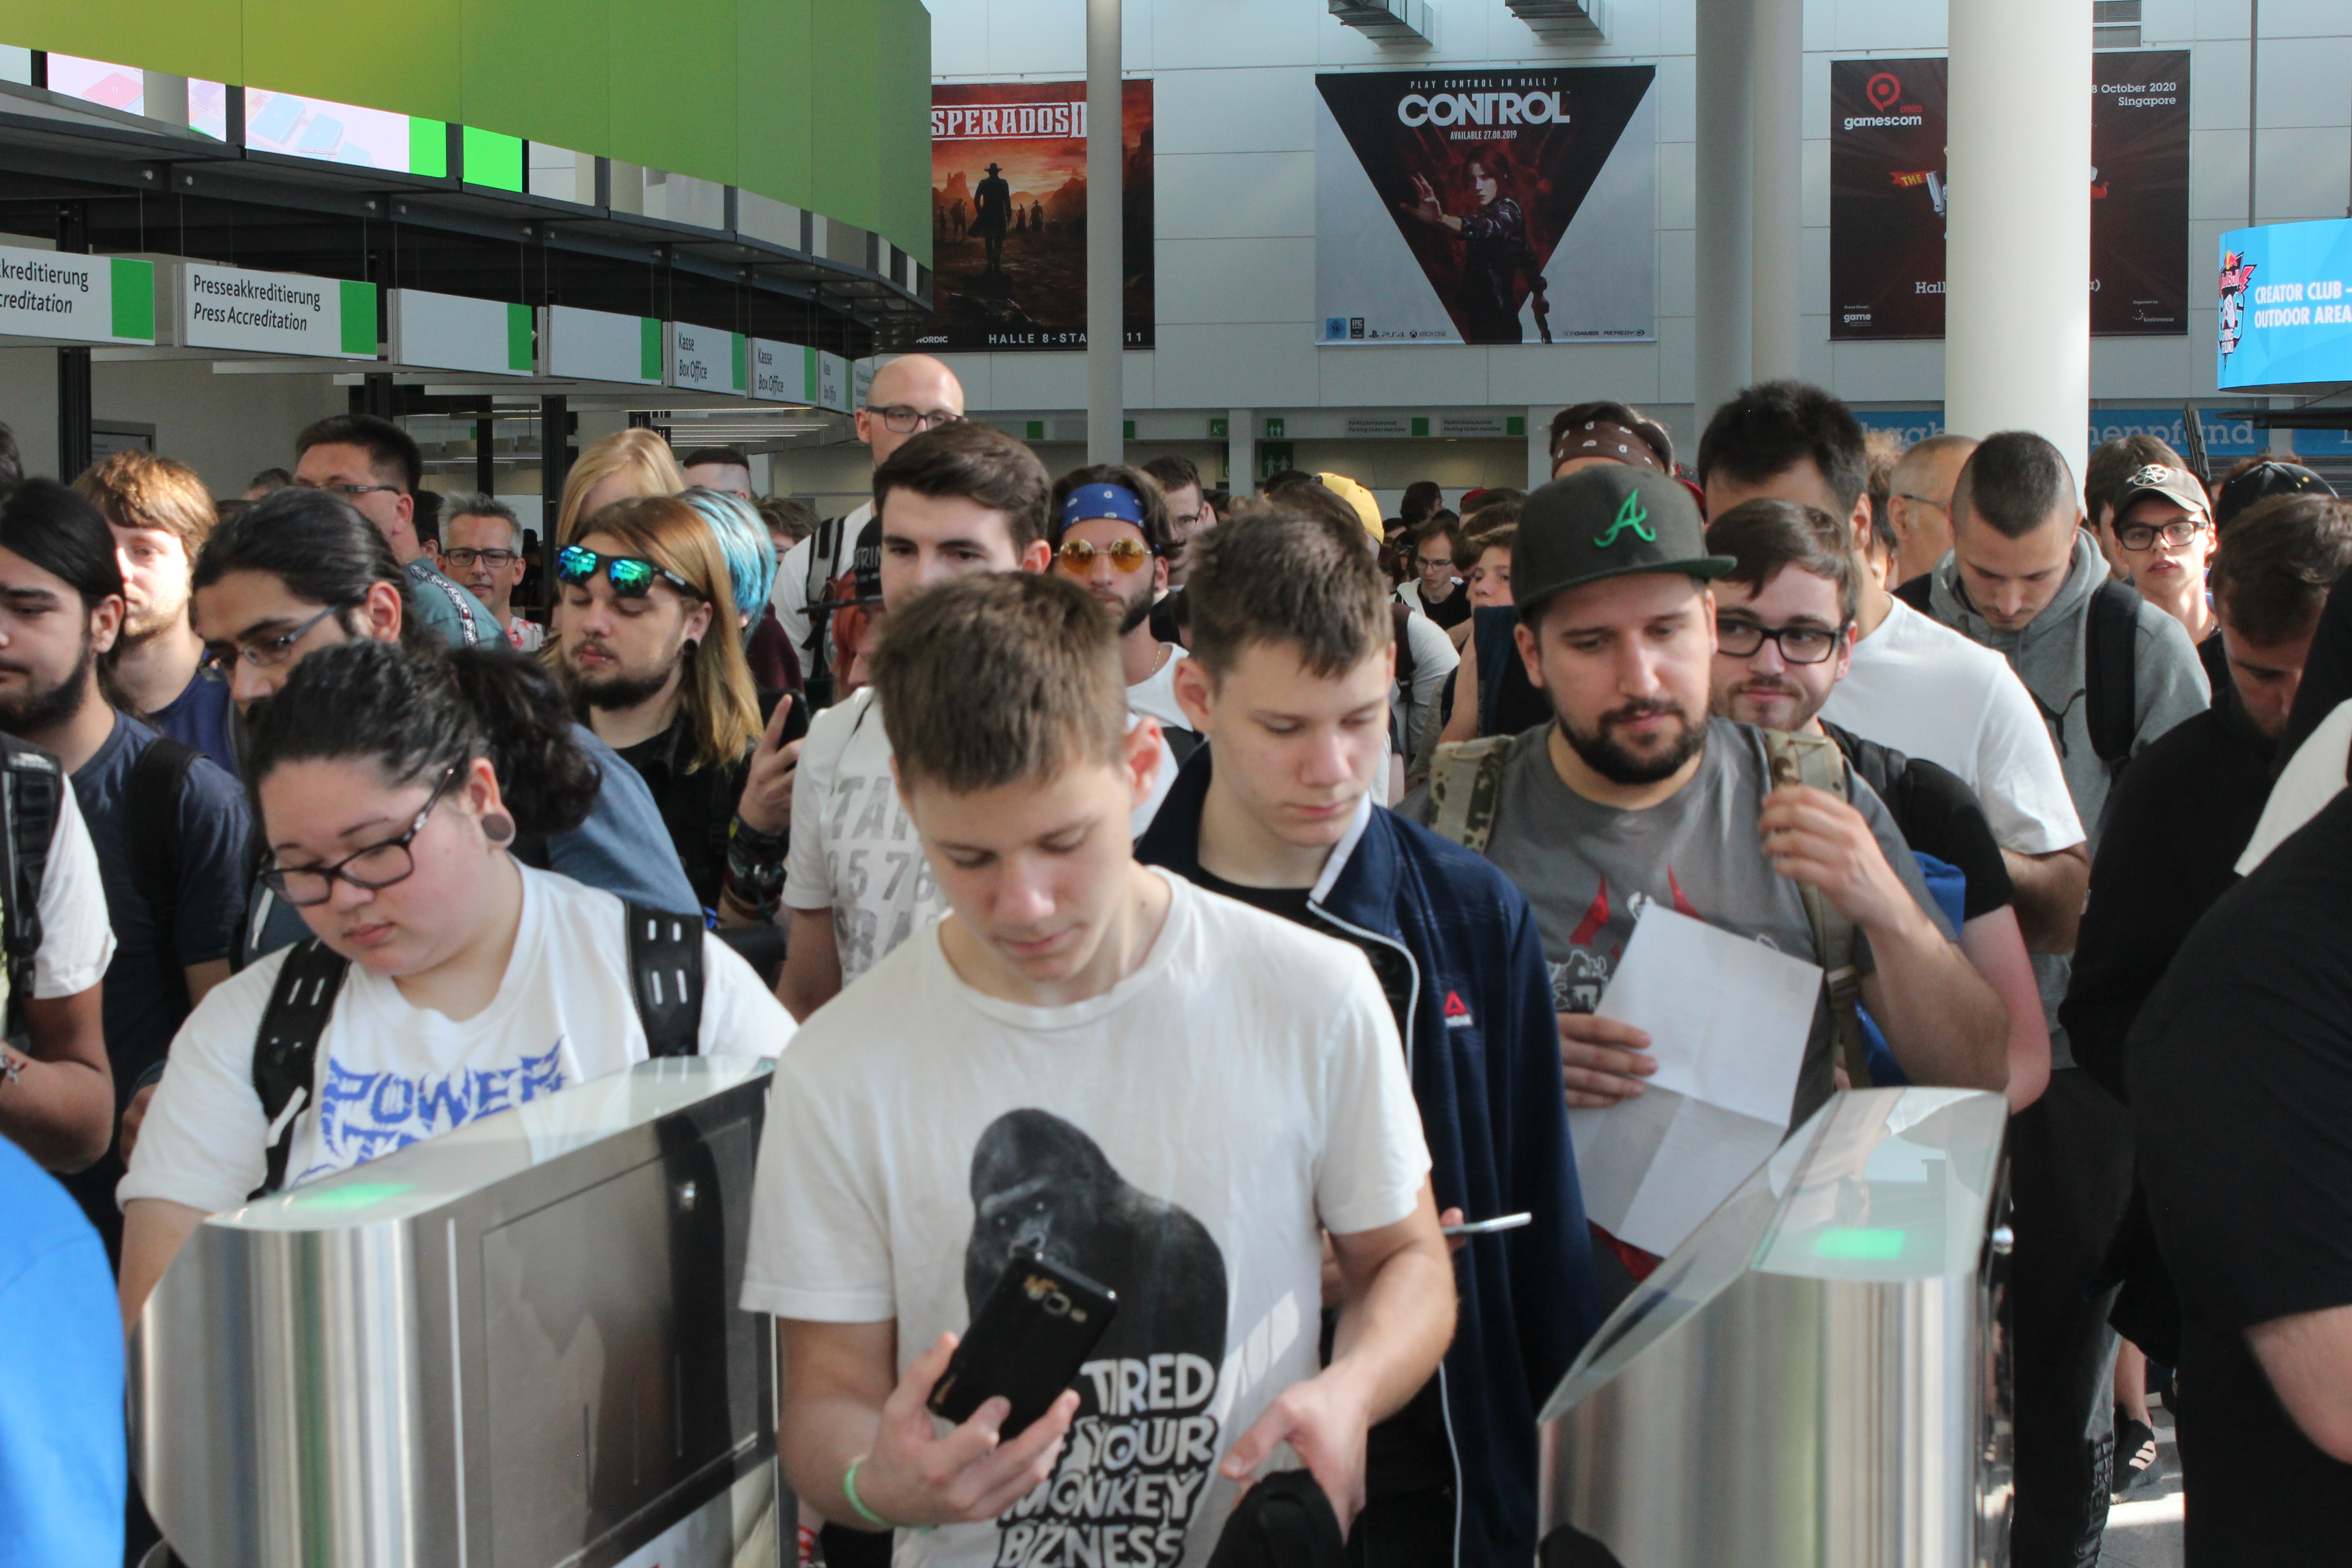 A crowd queuing to get into a games convention.